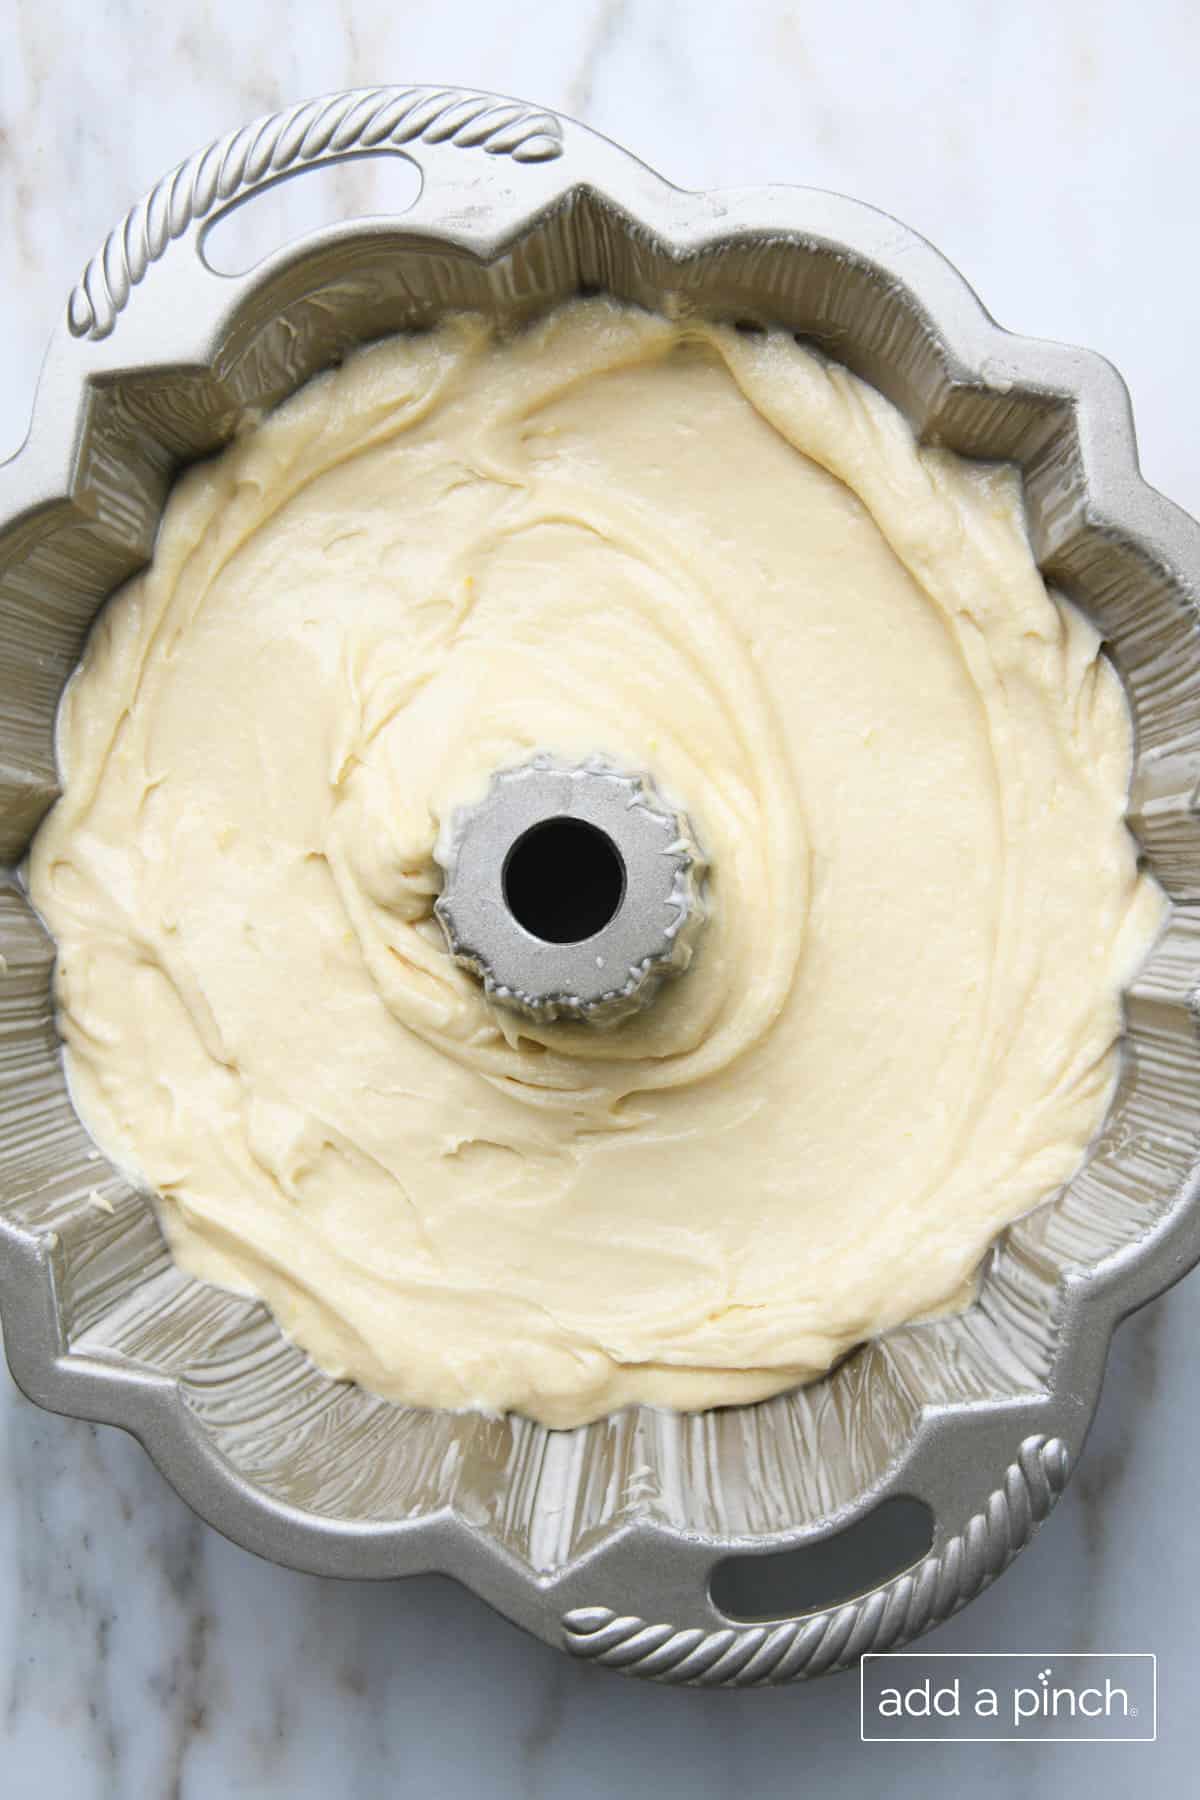 Lemon pound cake batter is poured into a greased and prepared silver bundt cake pan with handles. Pan sits on marble countertop.